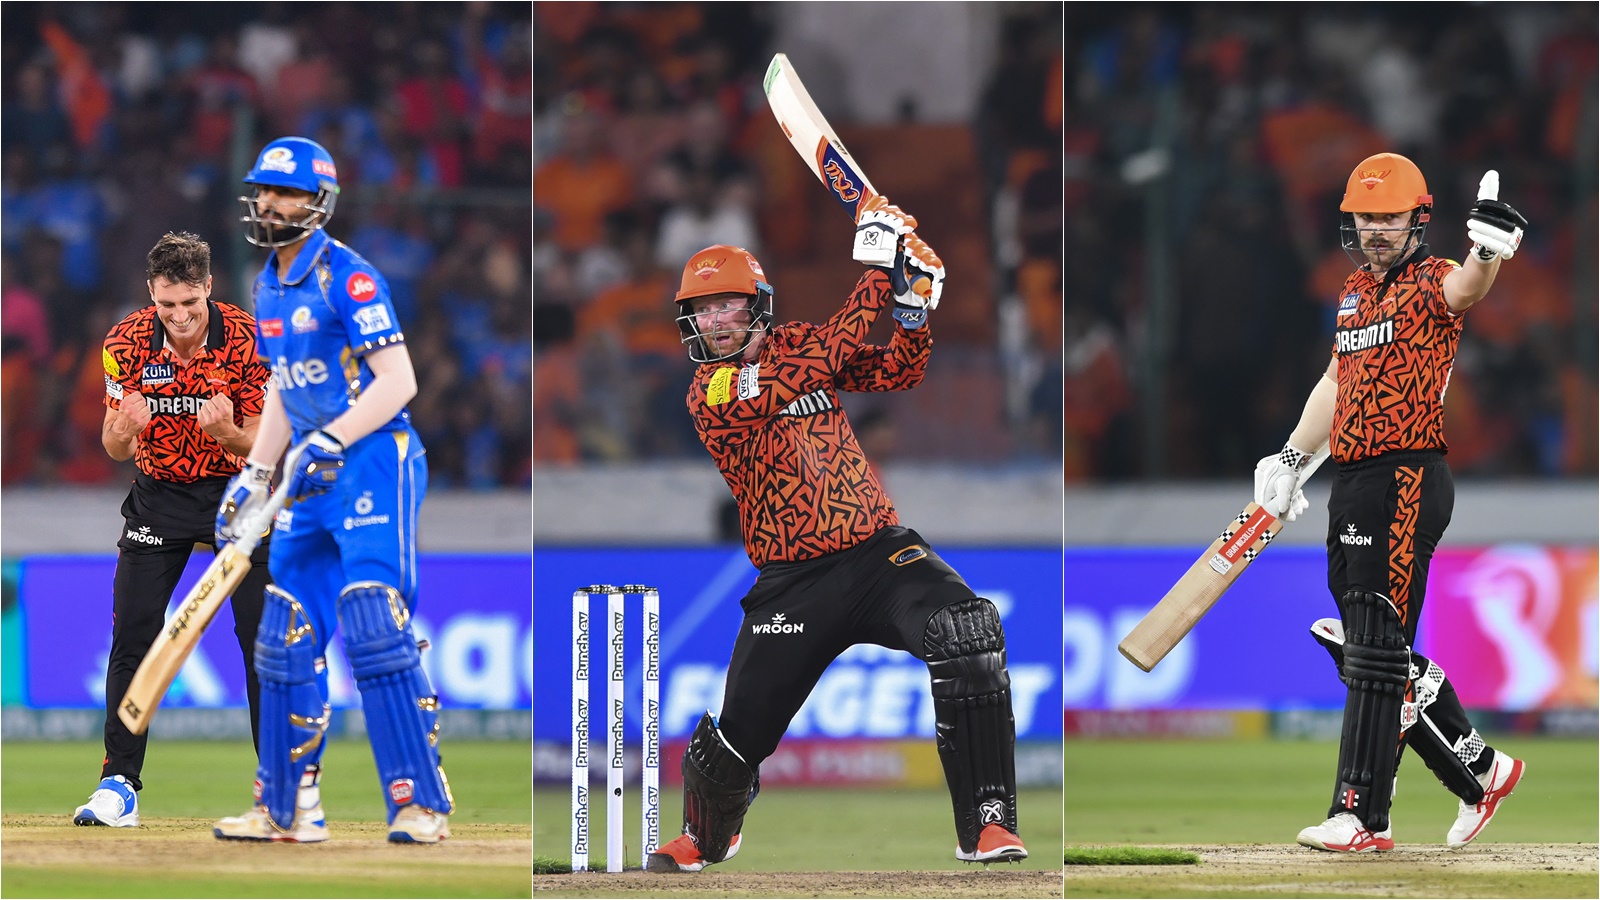 android, srh vs mi: cummins fights back for the bowlers on a day newcomer kwena maphaka has a baptism by fire against travis head & co